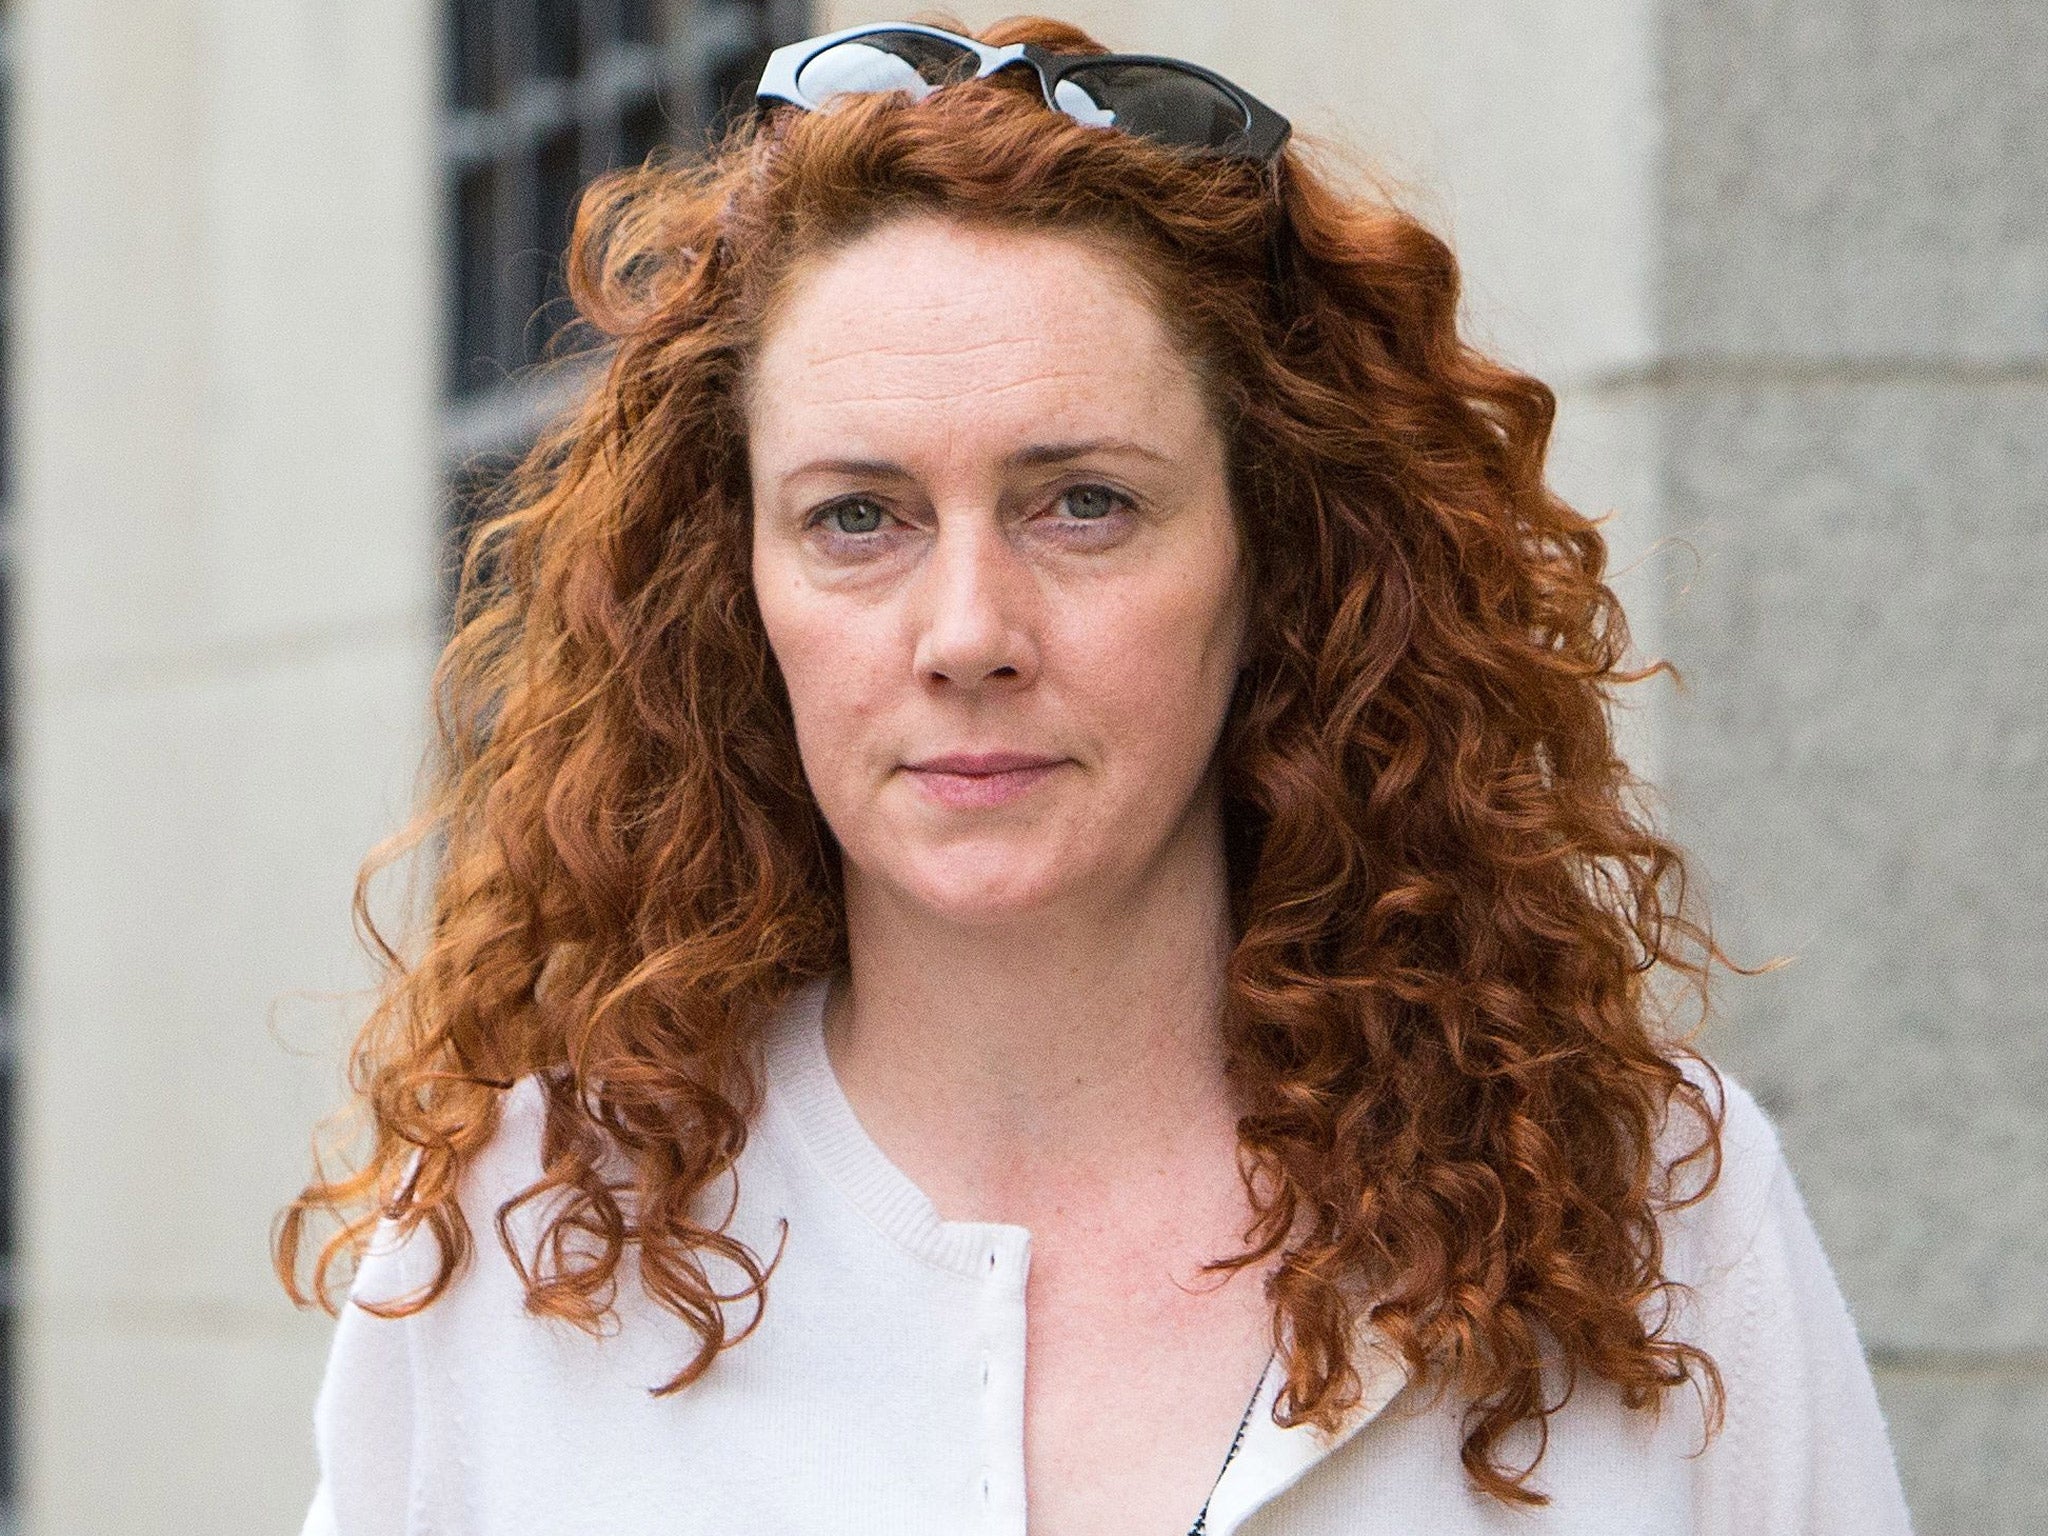 Former chief executive of News International Rebekah Brooks arrives at the Old Bailey